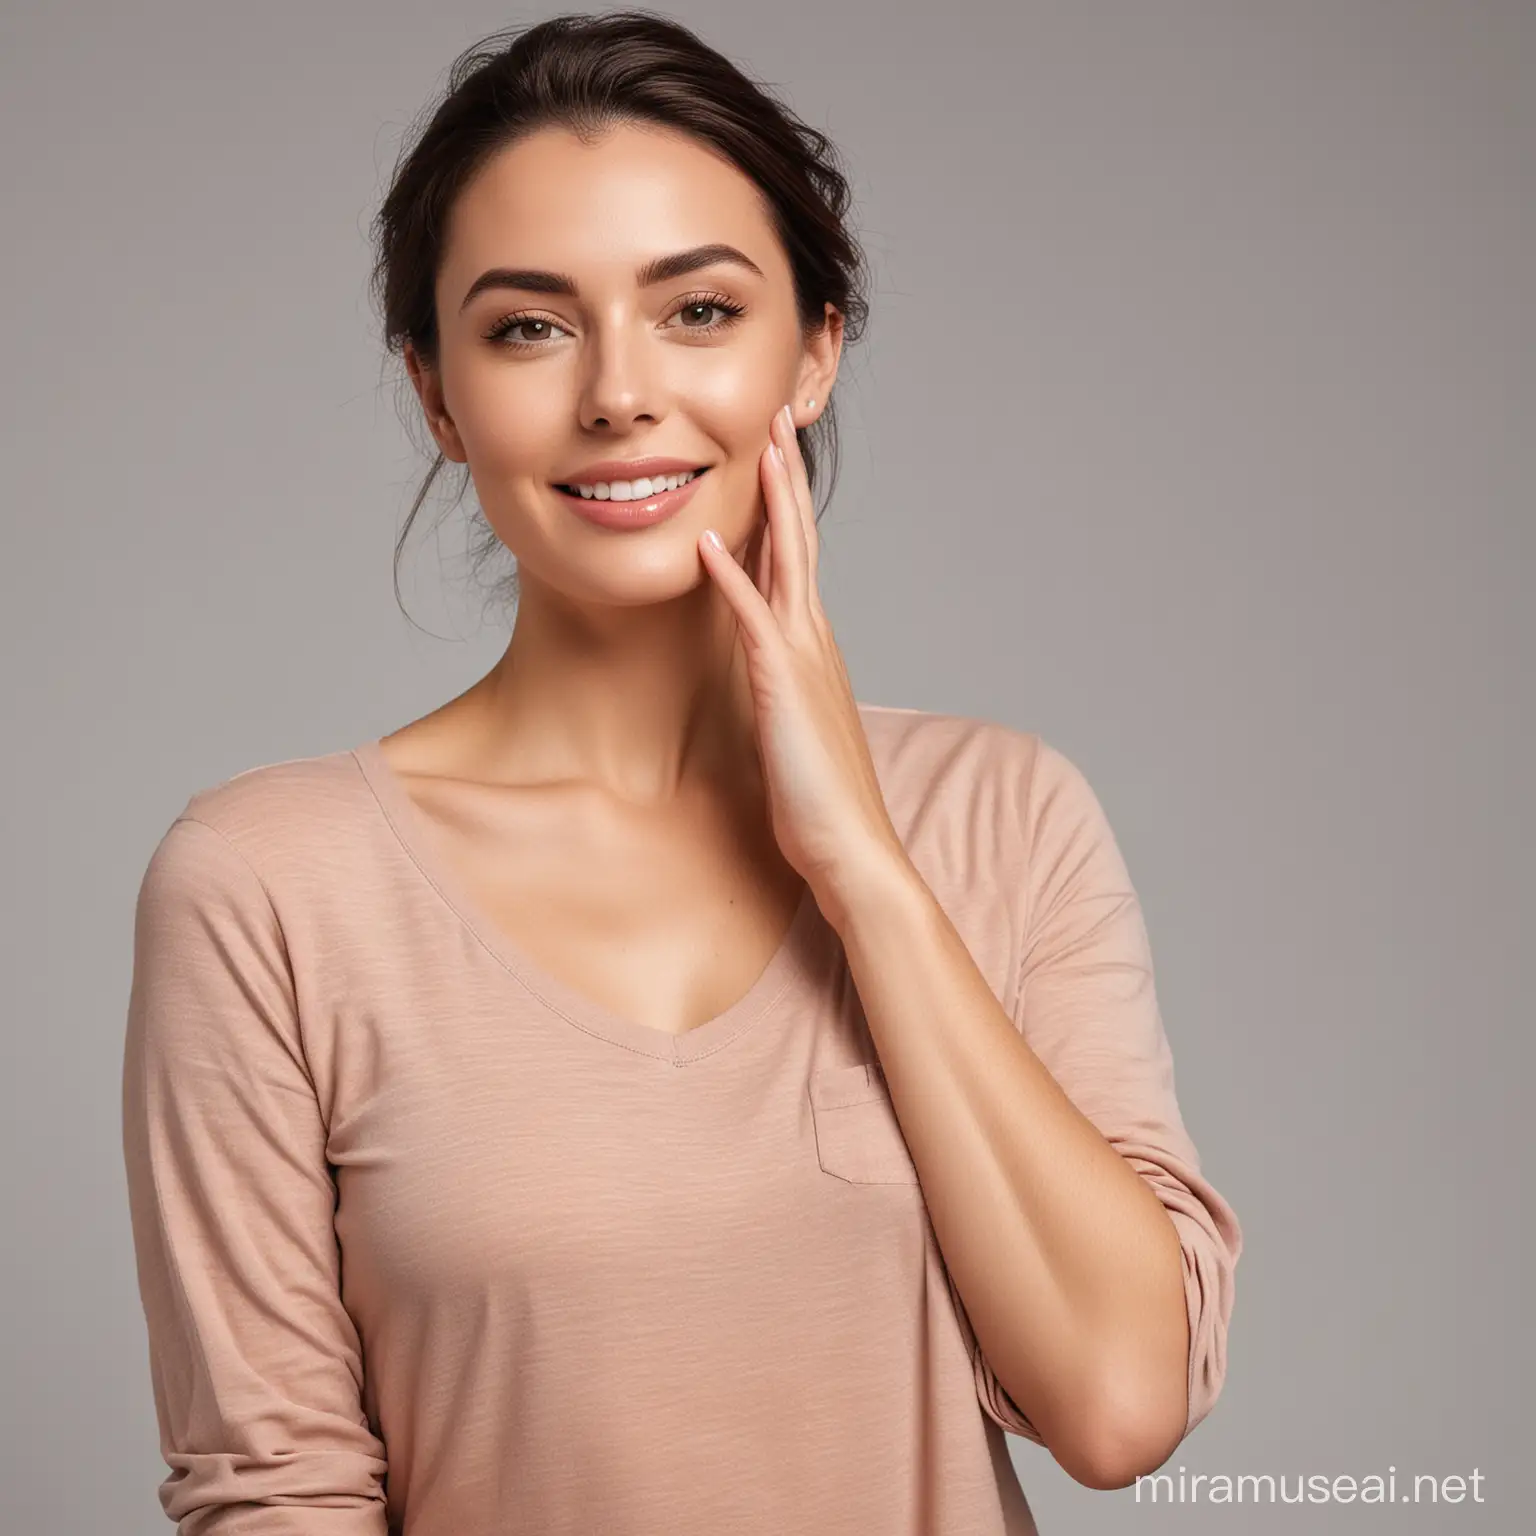 Your body is your most prized possession cropped studio shot of a beautiful mid adult woman skin care showing her face and half body her hands are in her pocket